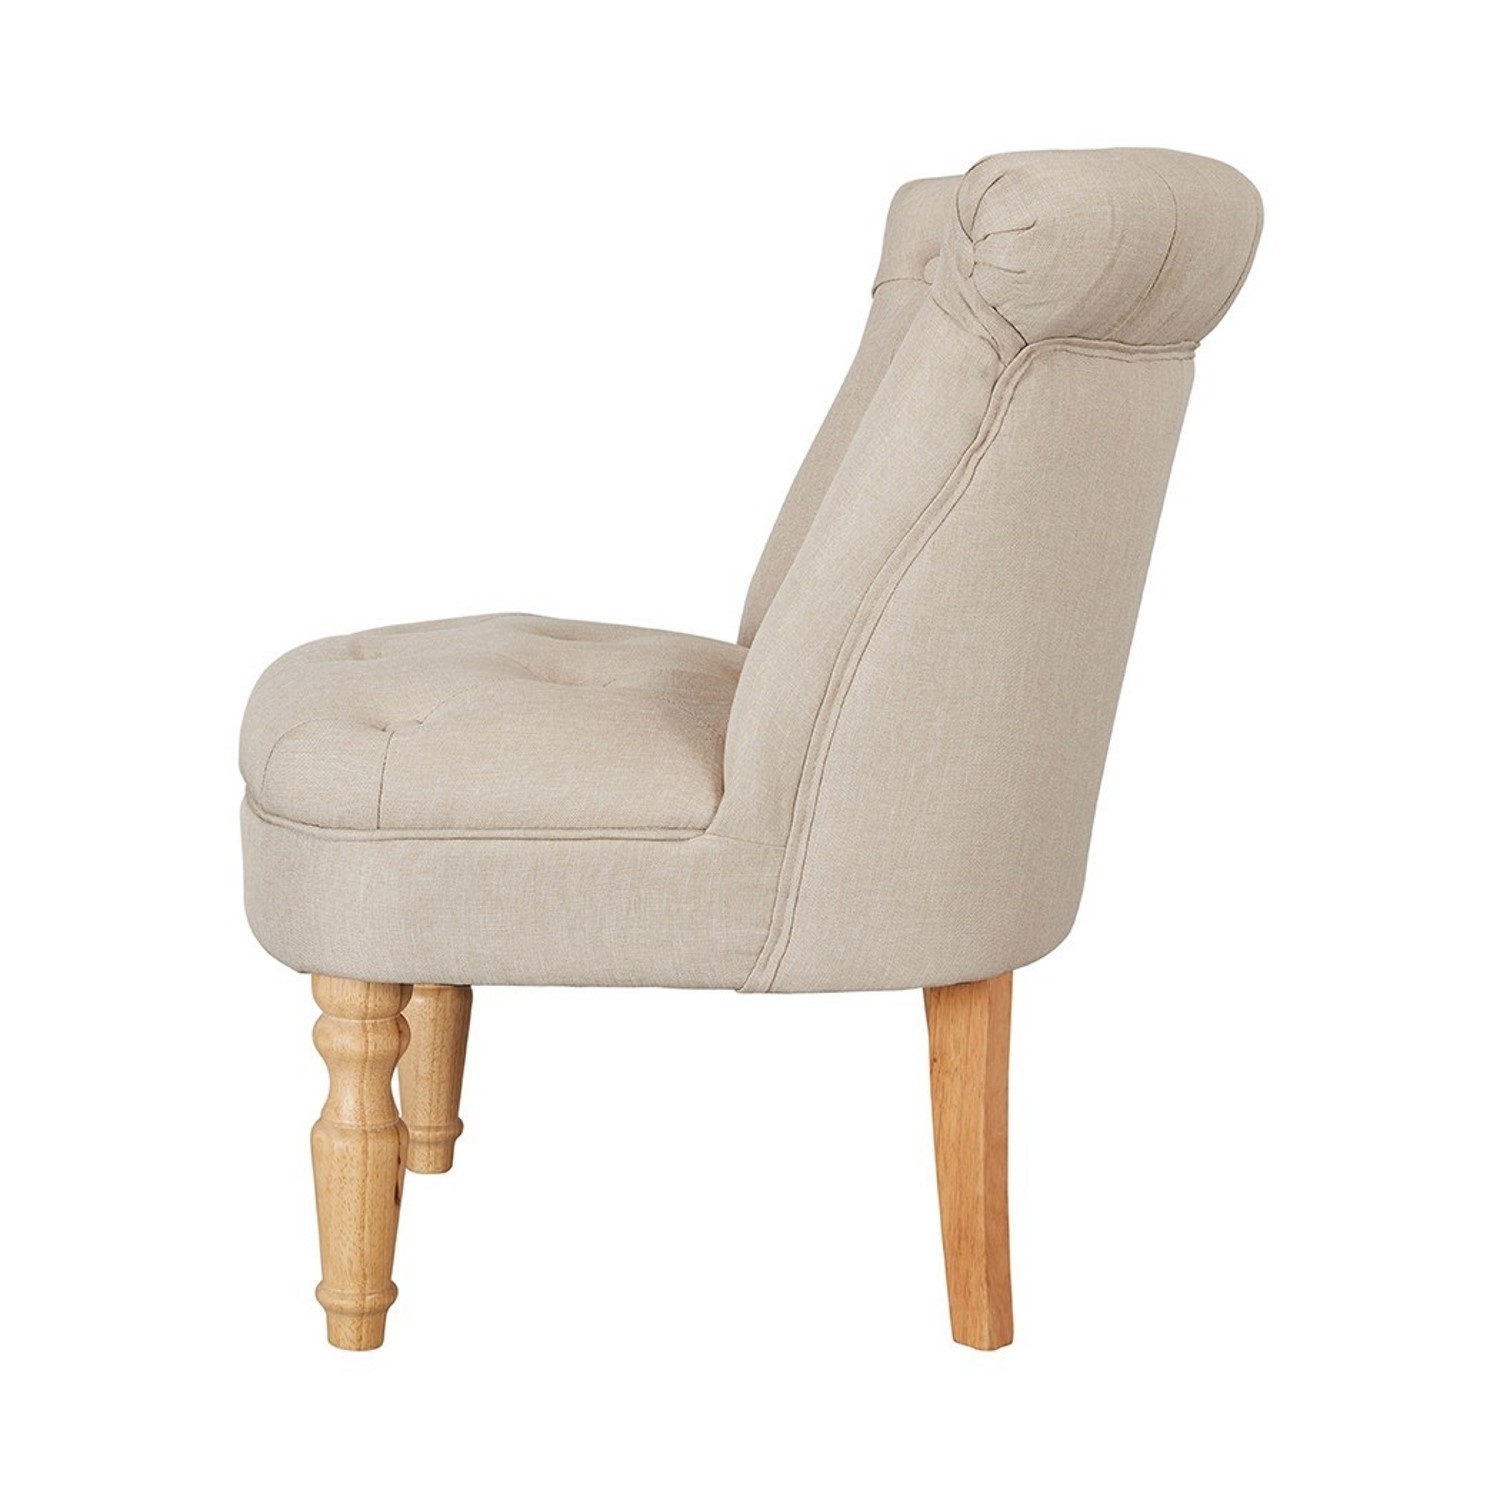 Read more about Beige fabric accent chair charlotte lpd